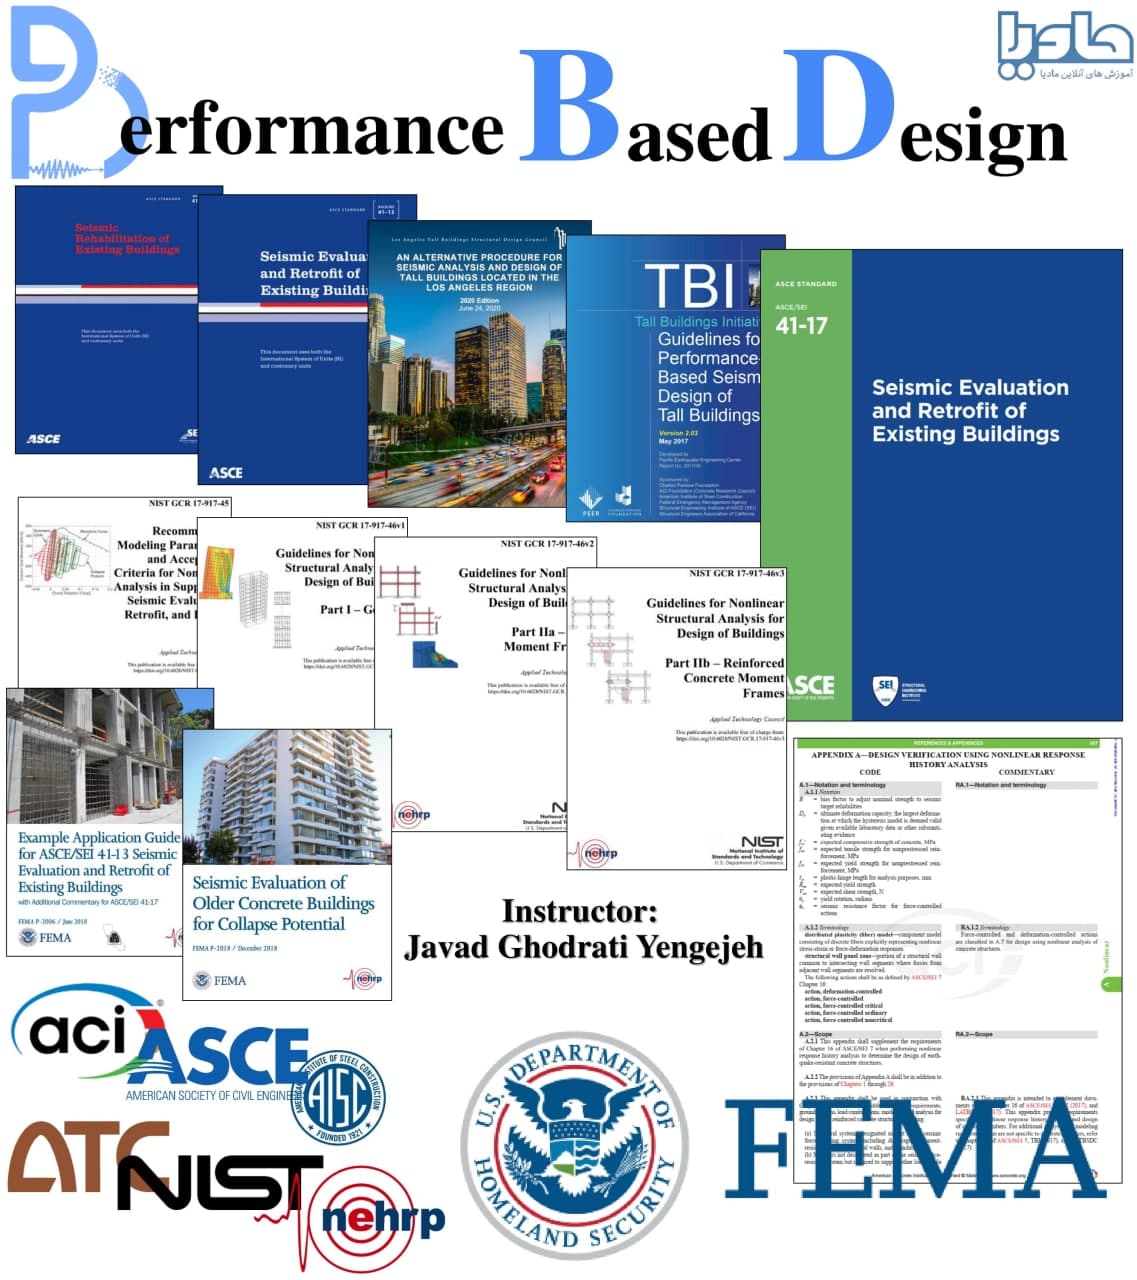 Performance-Based Seismic Design (Standards and Documents)